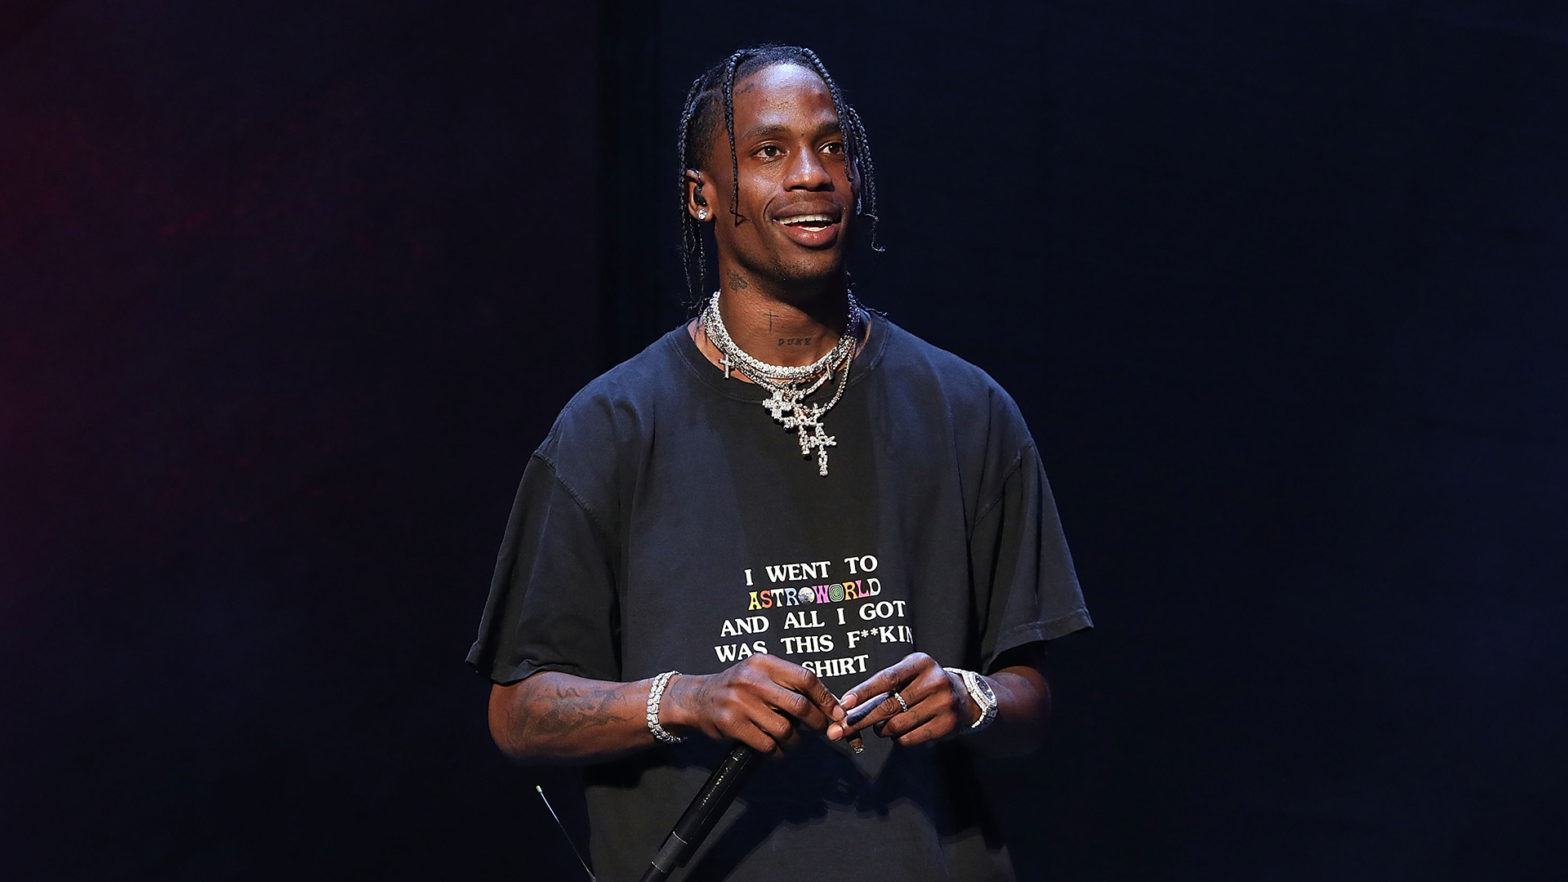 Merchandise From Travis Scott's Concerts In London Reach Over $1M In Sales Within One Weekend